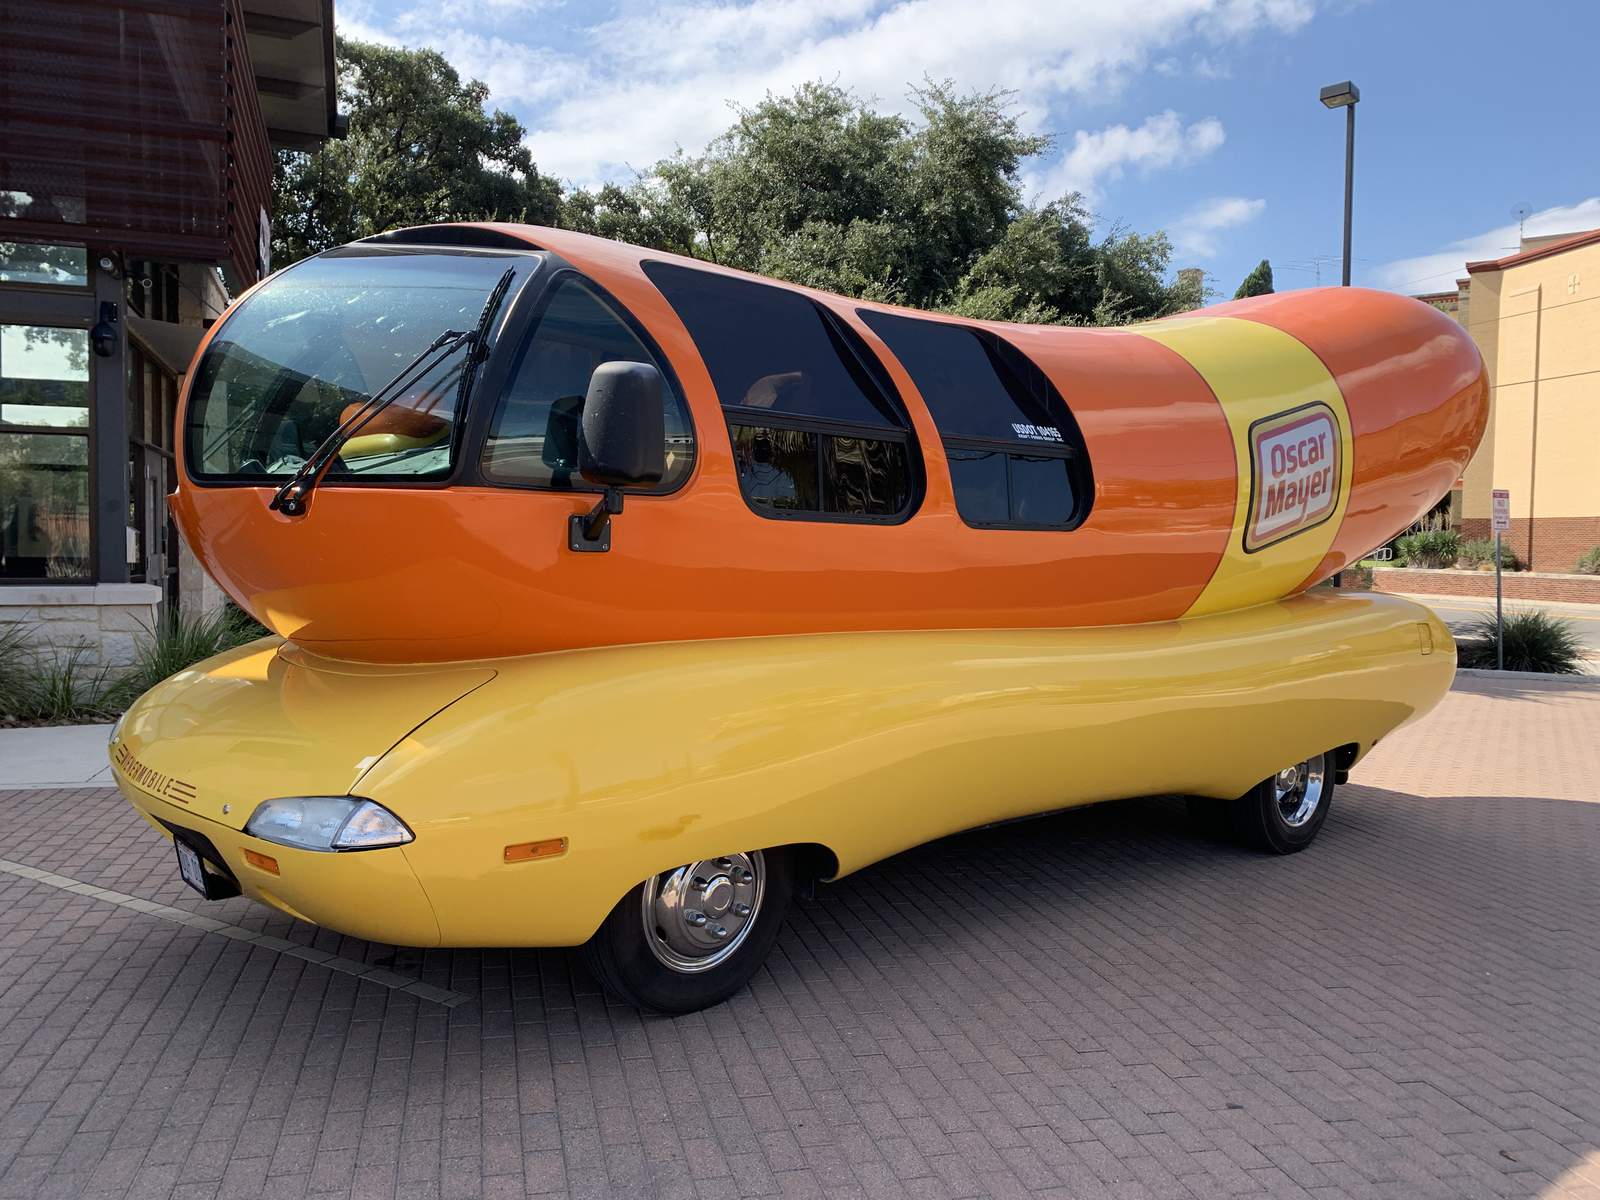 'Ketchup’ with the Oscar Mayer Wienermobile as it visits San Antonio